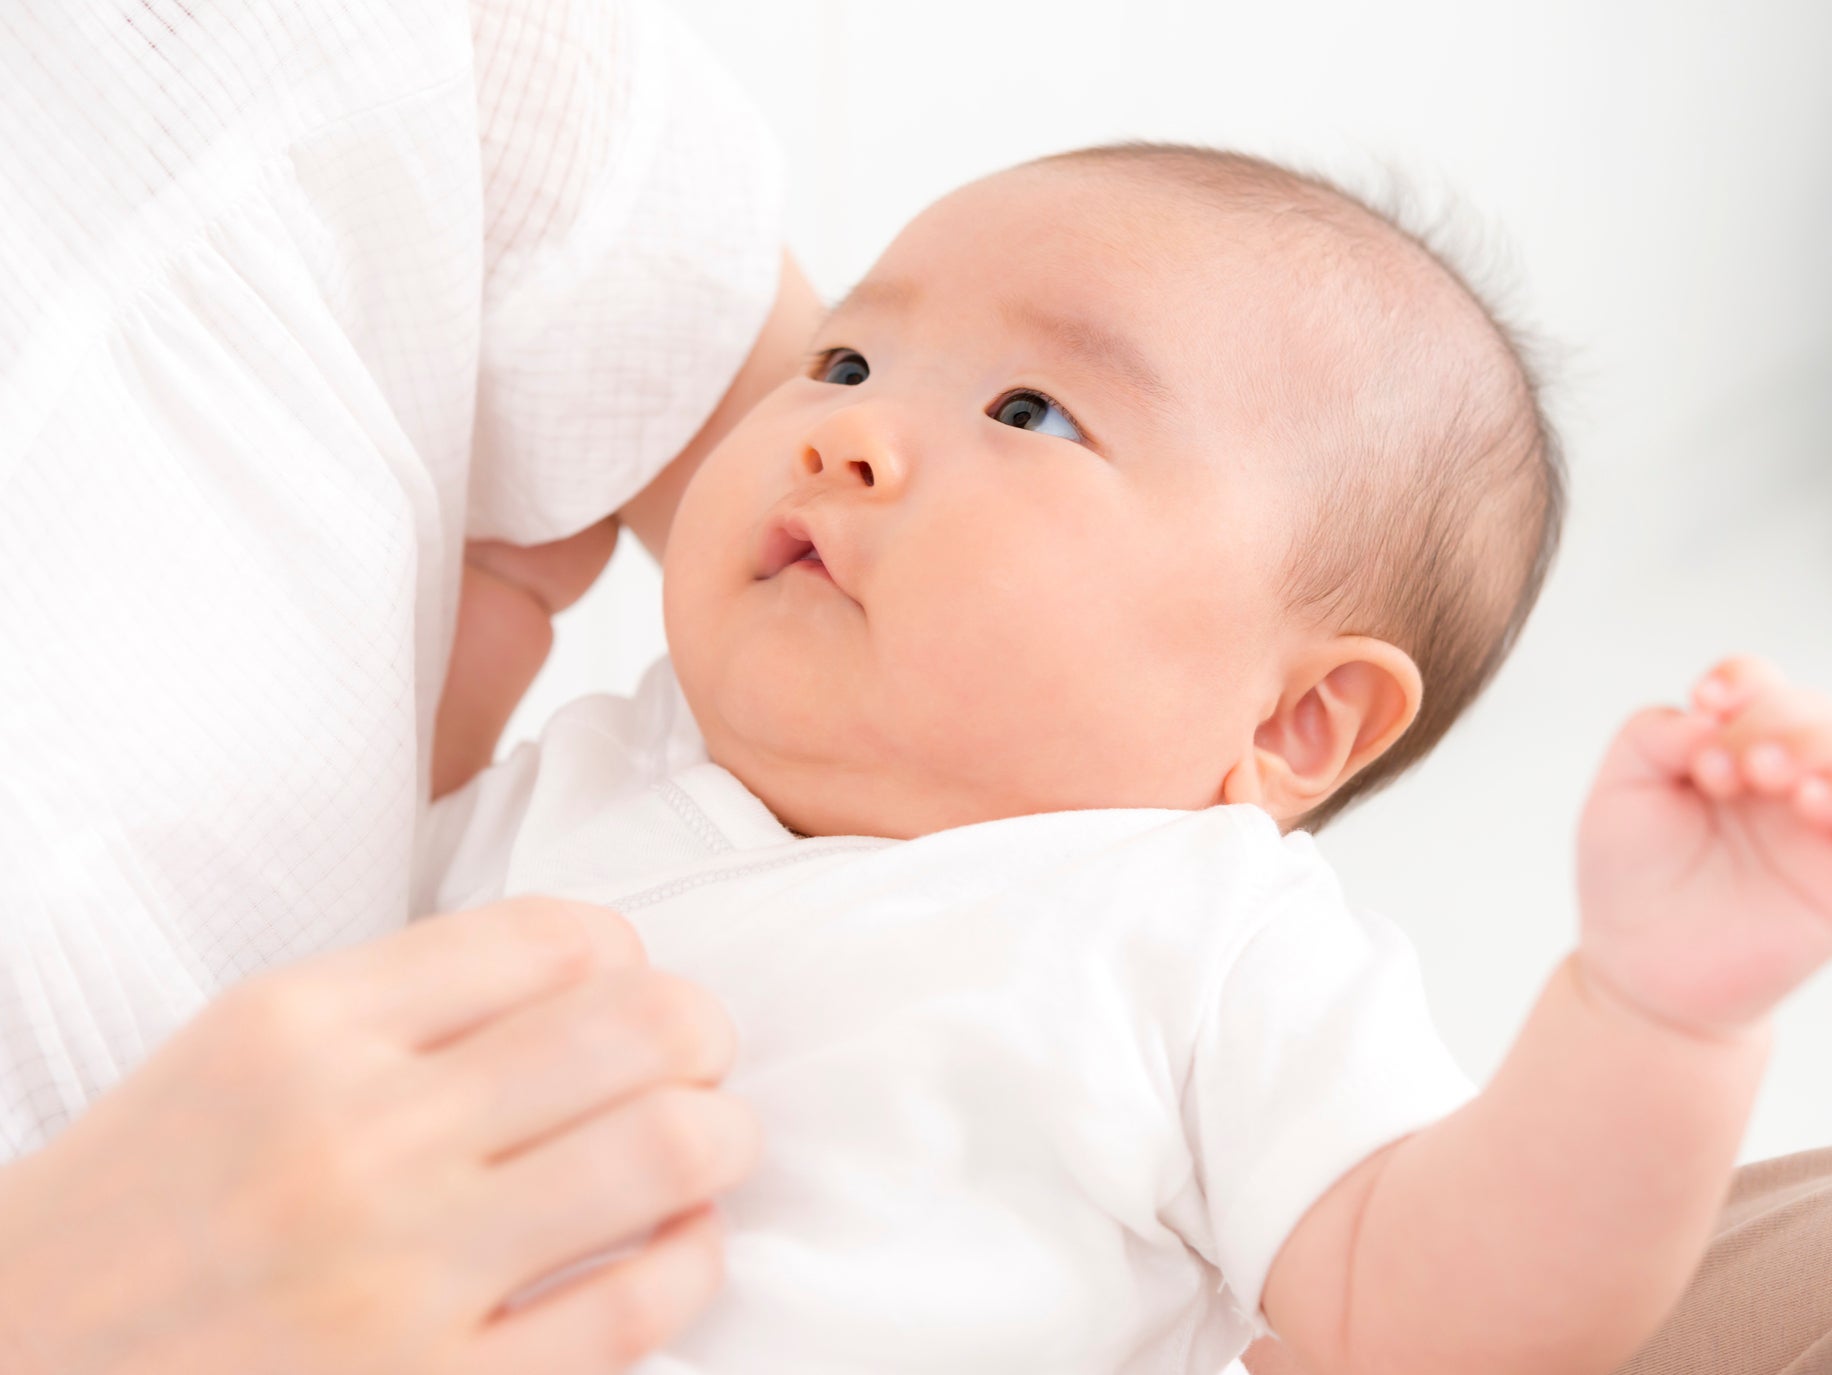 The number of births in Japan last year fell to about 865,000, down 5.8 per cent on the previous year